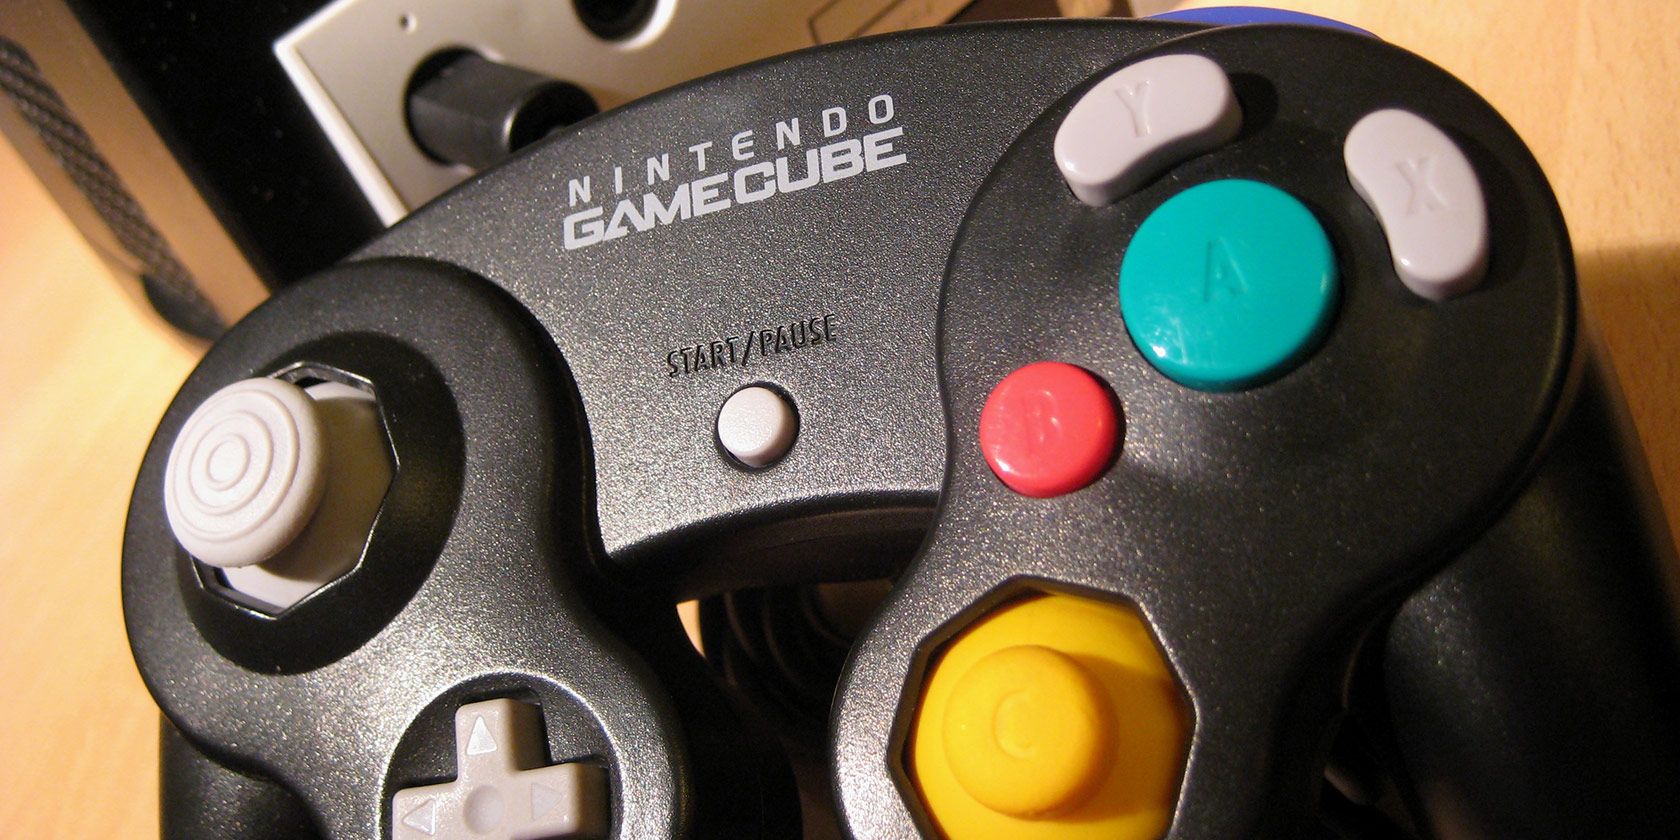 5 Of The Most Valuable Games For The Nintendo GameCube